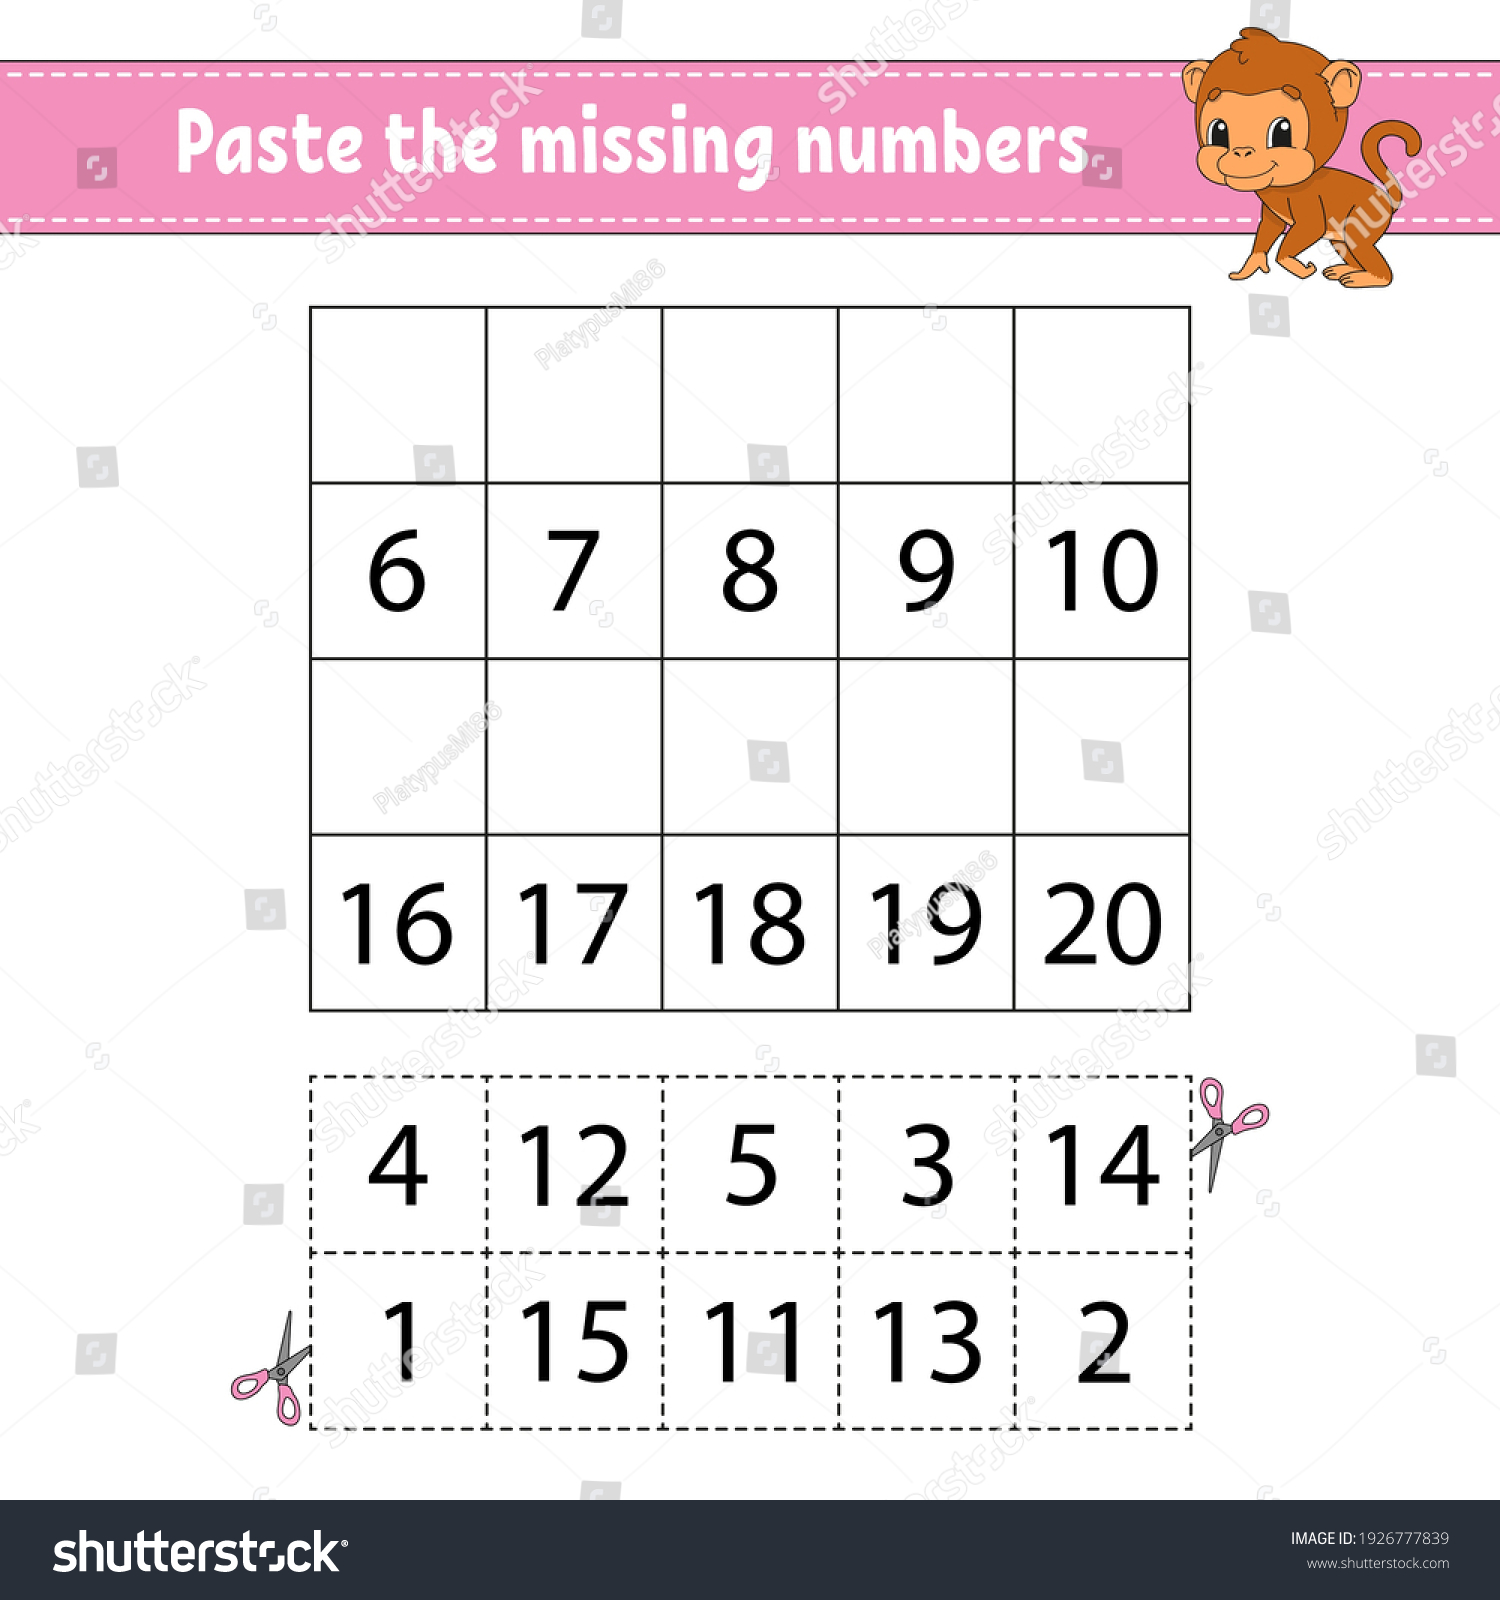 paste-missing-numbers-120-game-children